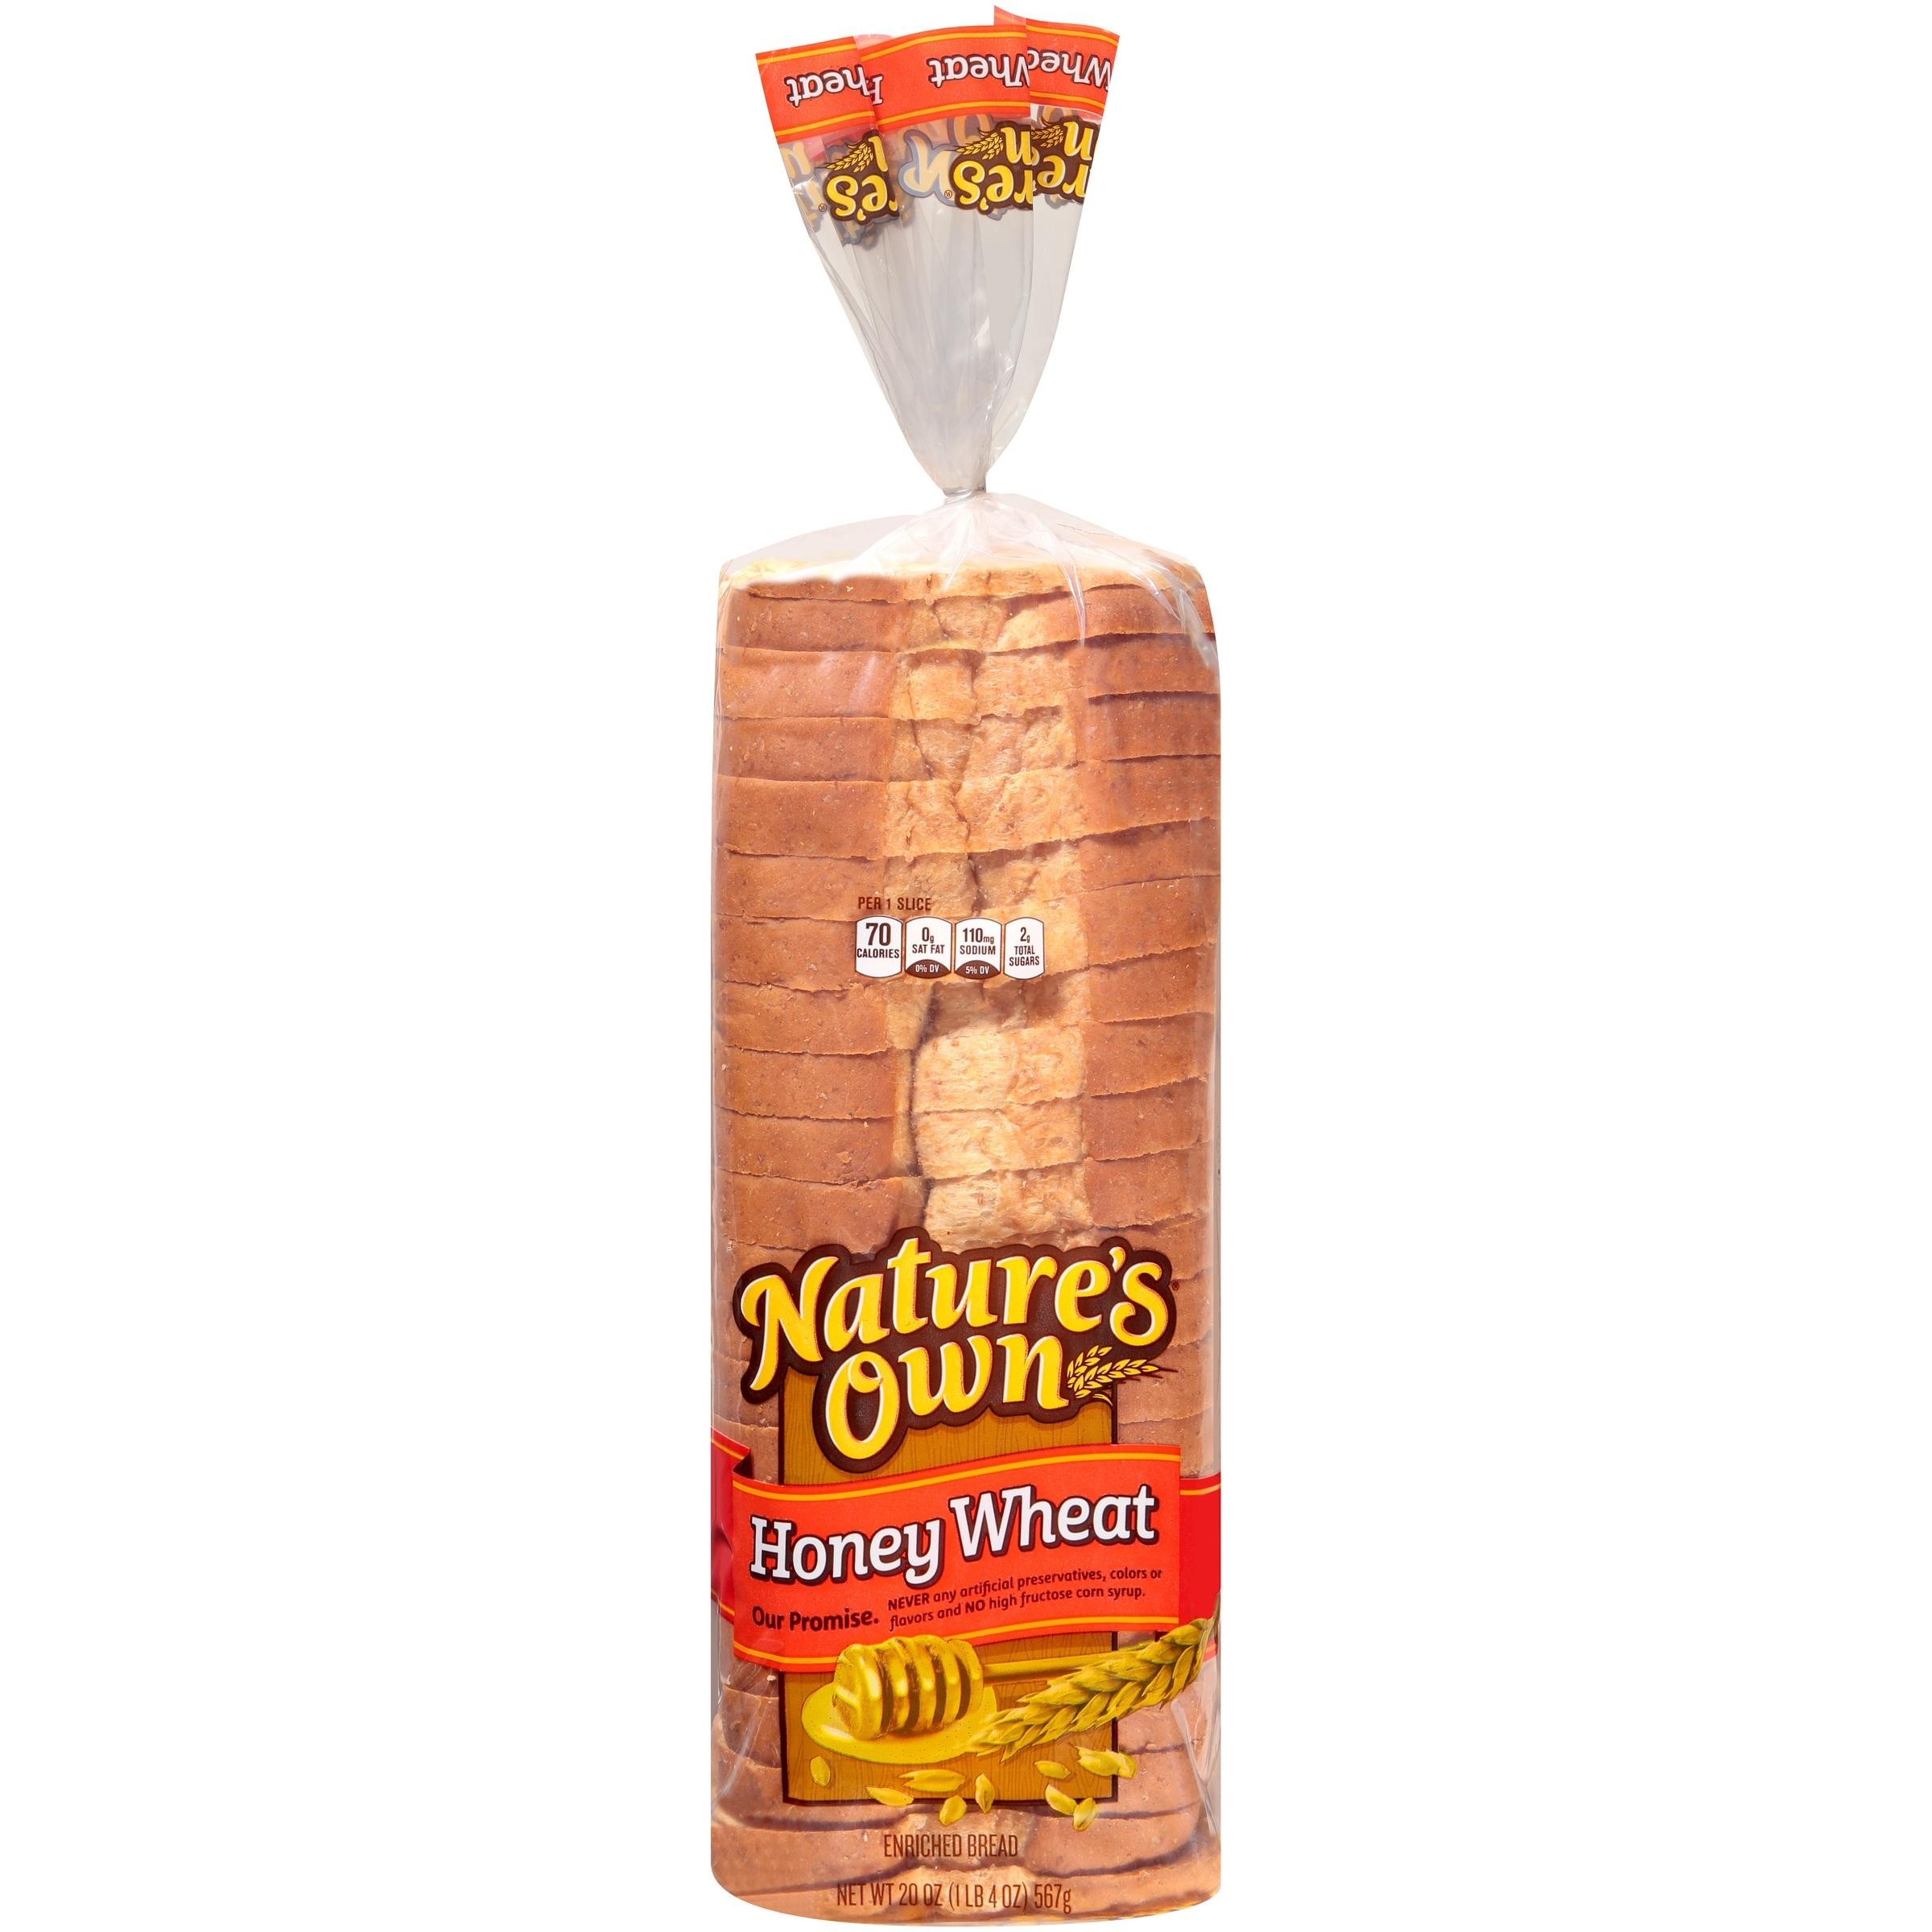 Nature's Own Enriched Bread Honey Wheat - 20.0 Oz